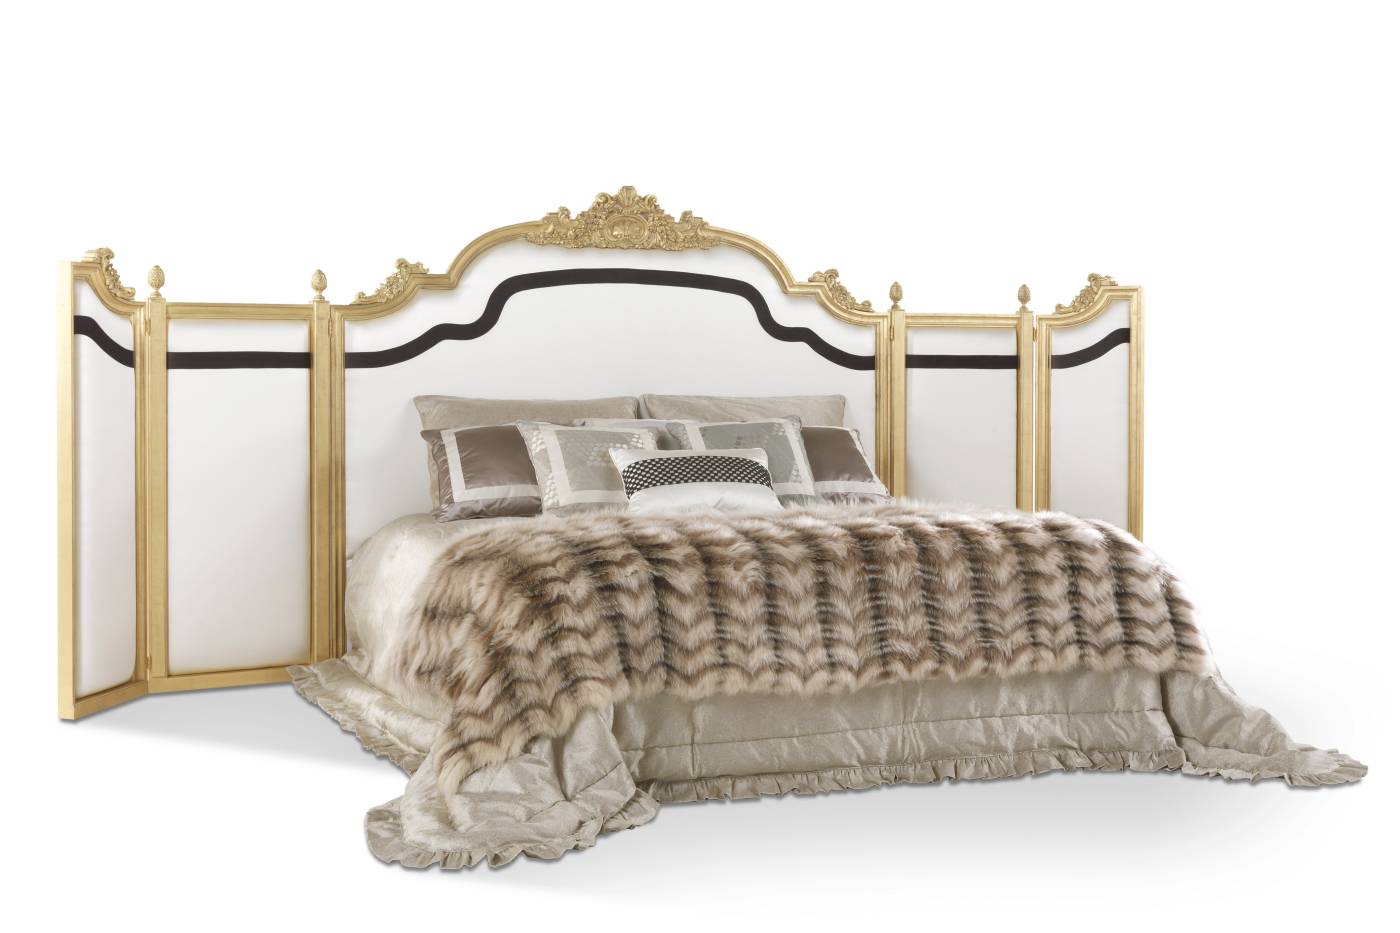 ORPHEUS bed – Jumbo Collection Italian luxury classic BEDS. tailor-made interior design projects to meet all your furnishing needs